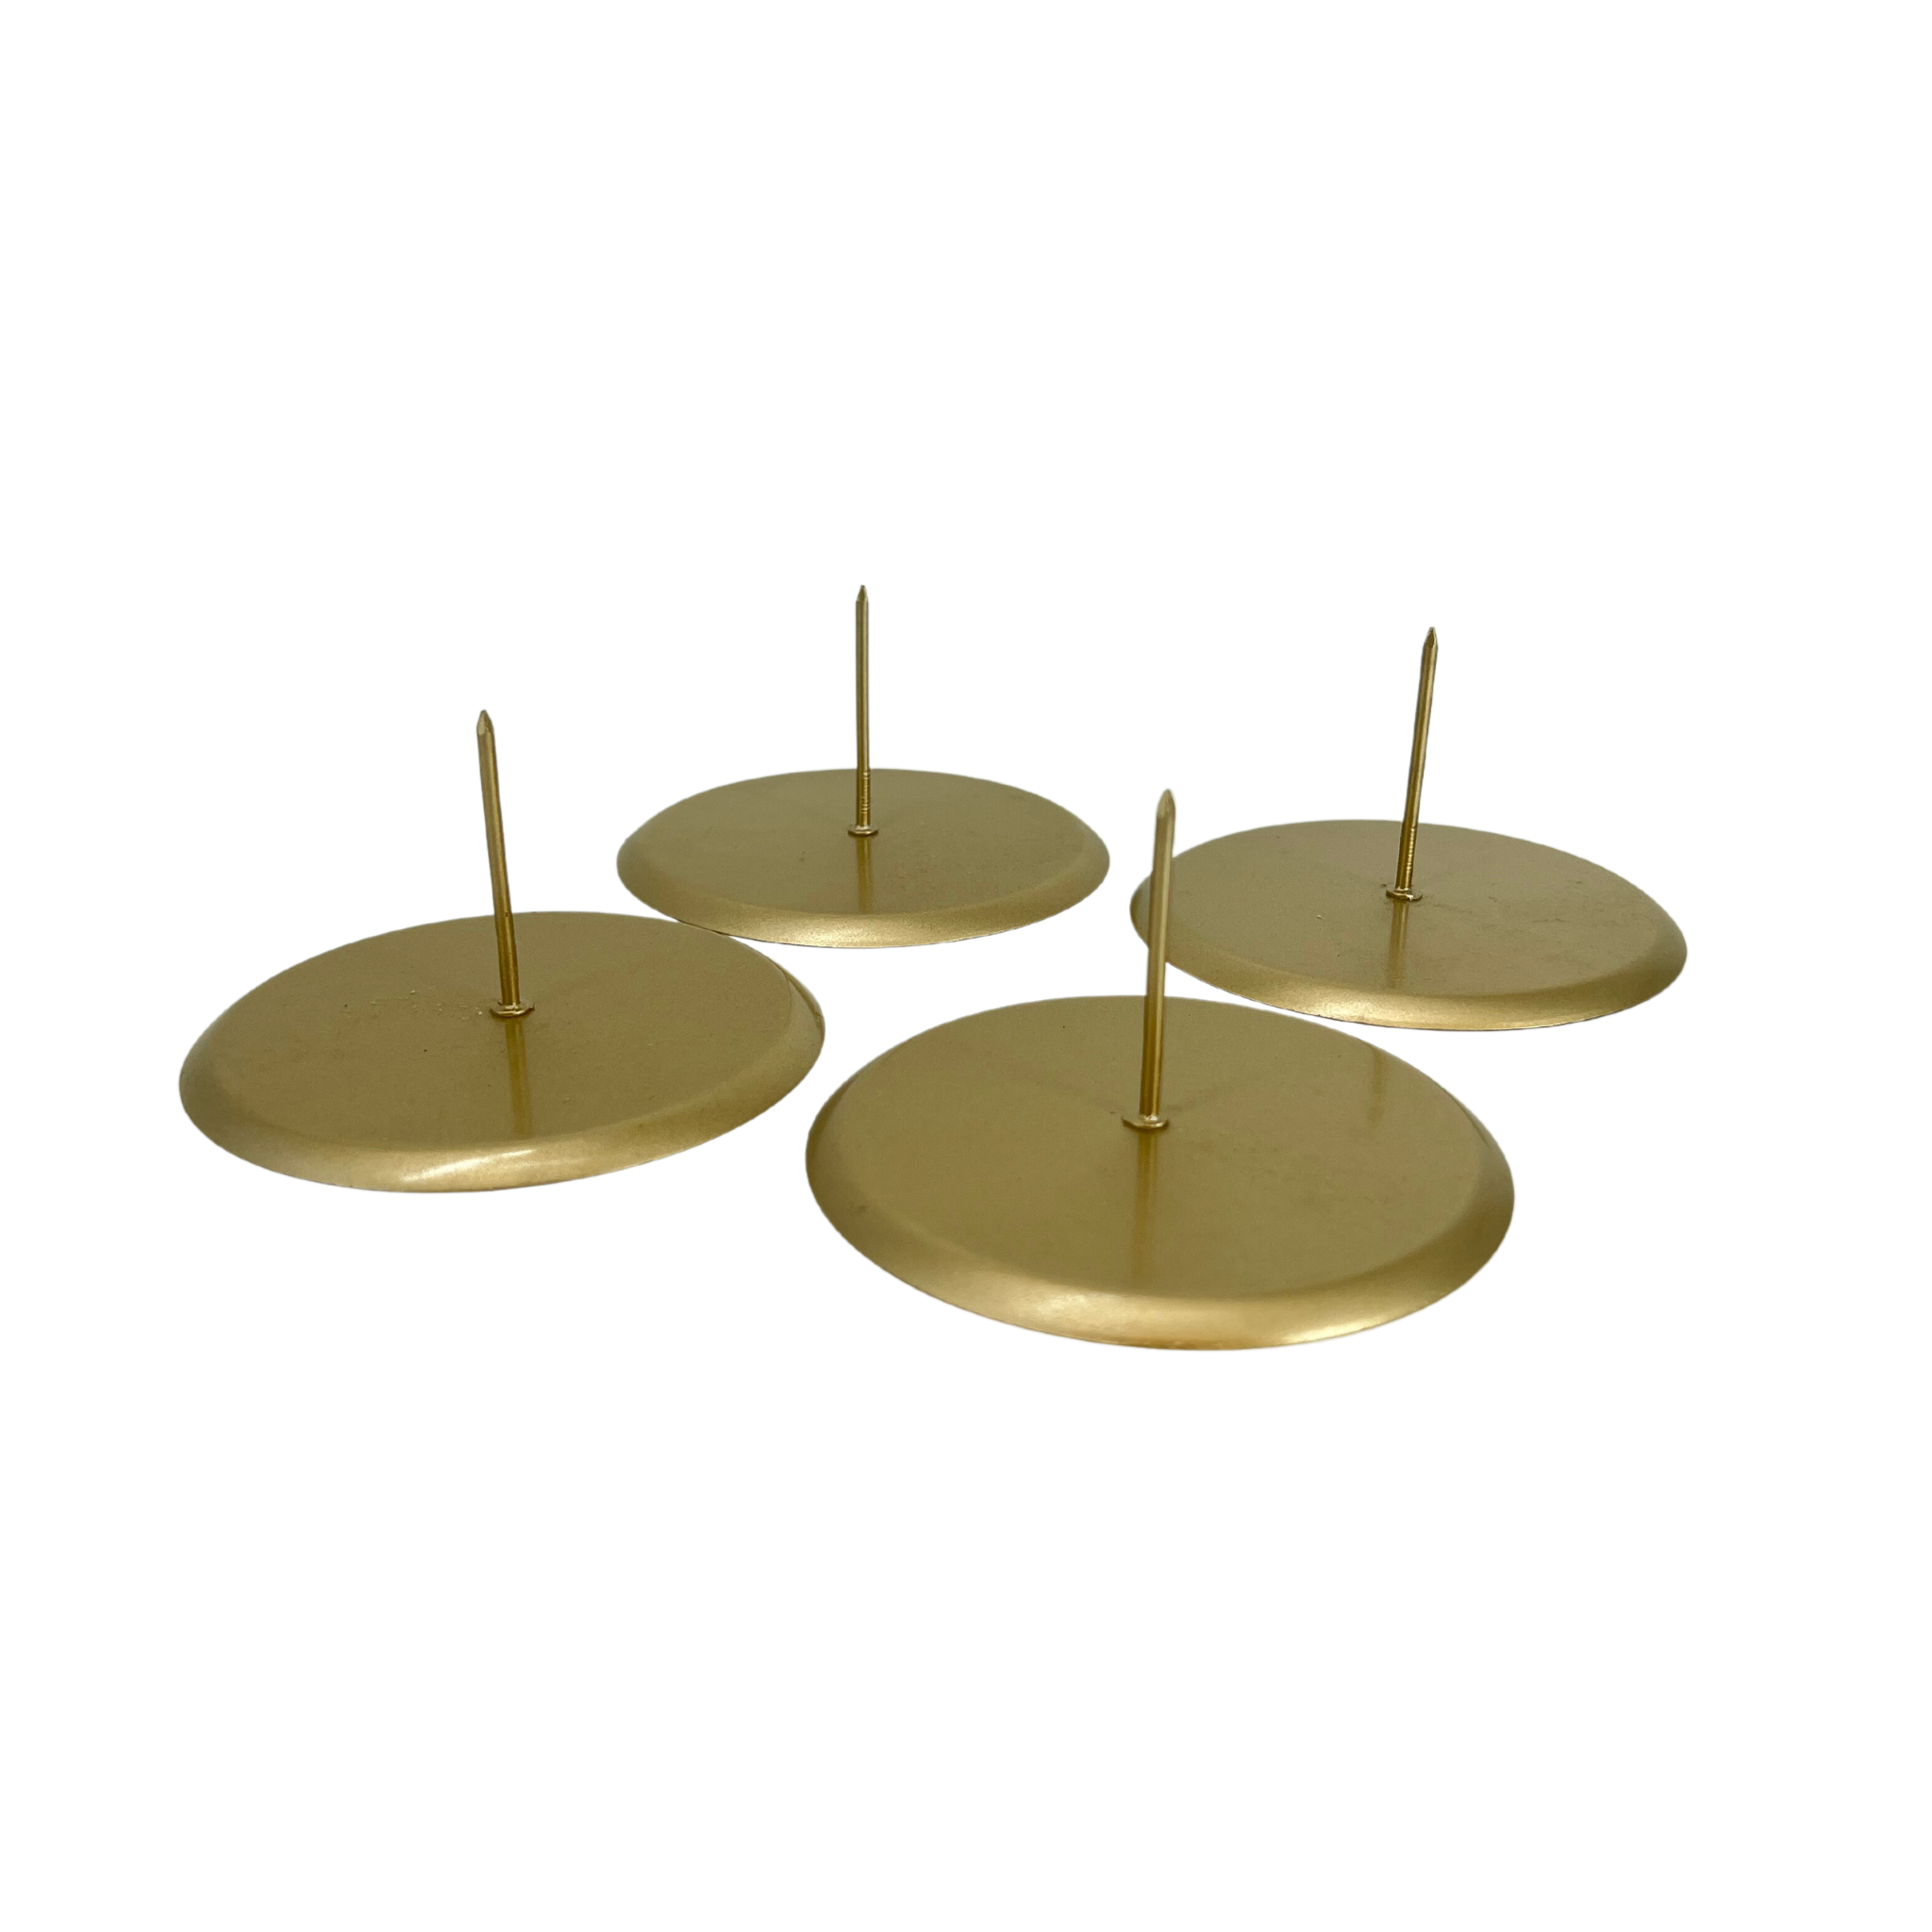 Lavabis candle holder pillar candle 4 pieces